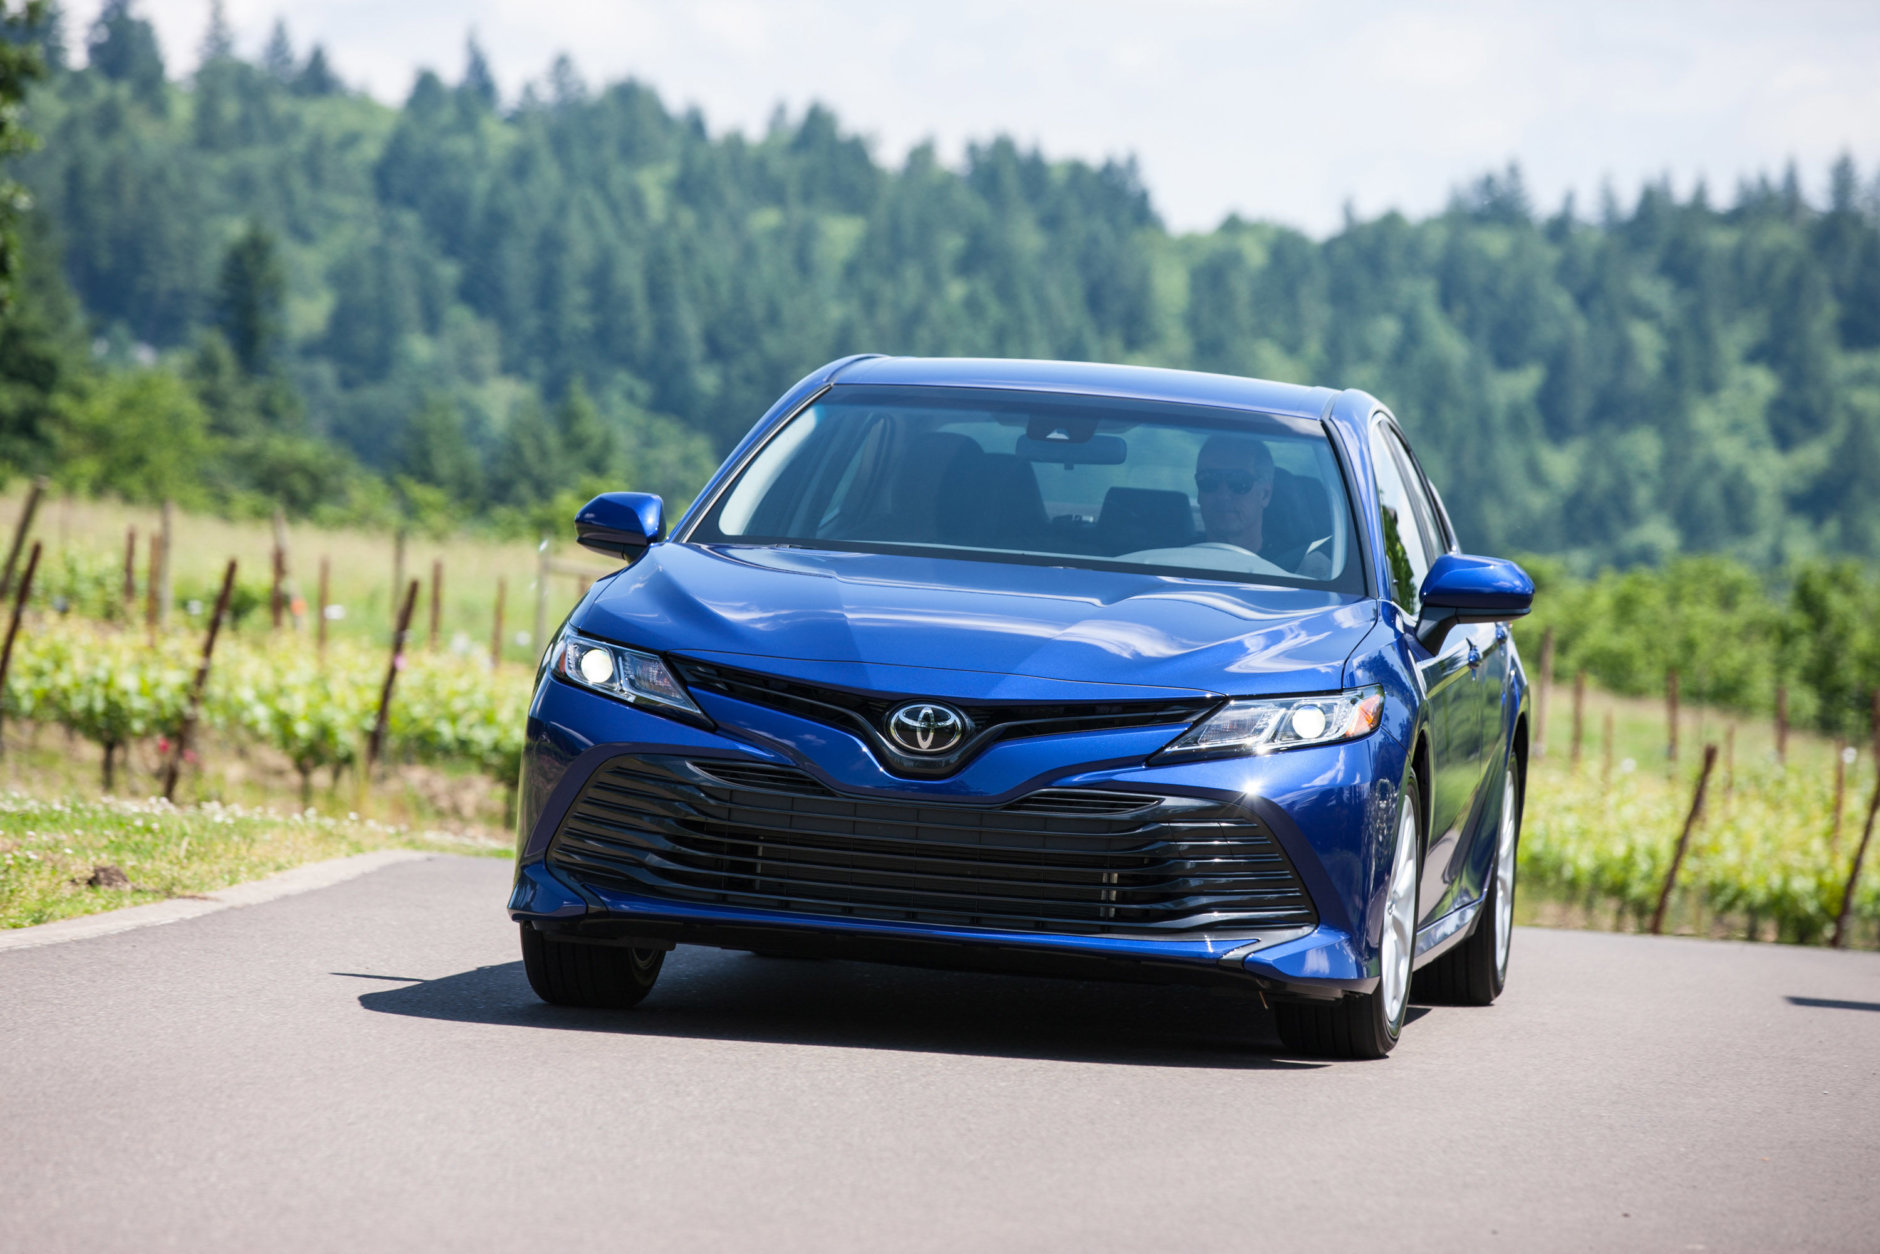 Best New Car for Teens $25,000 to $30,000:

The 2018 Toyota Camry

(Courtesy Toyota Motor Sales USA)